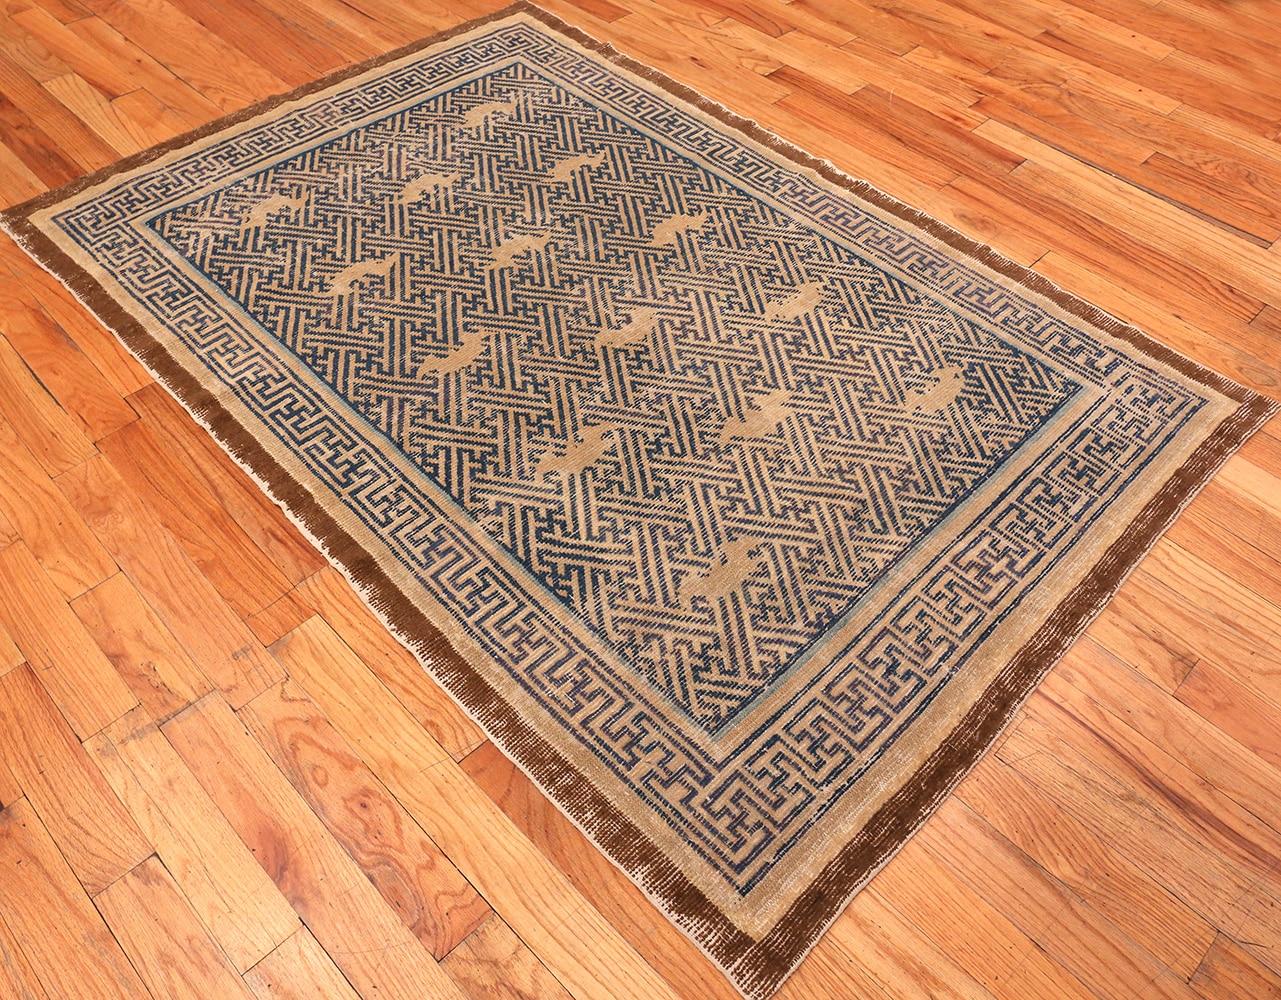 Wool Nazmiyal 17th Century Antique Chinese Ninghsia Rug. Size: 4 ft 5 in x 6 ft 4 in